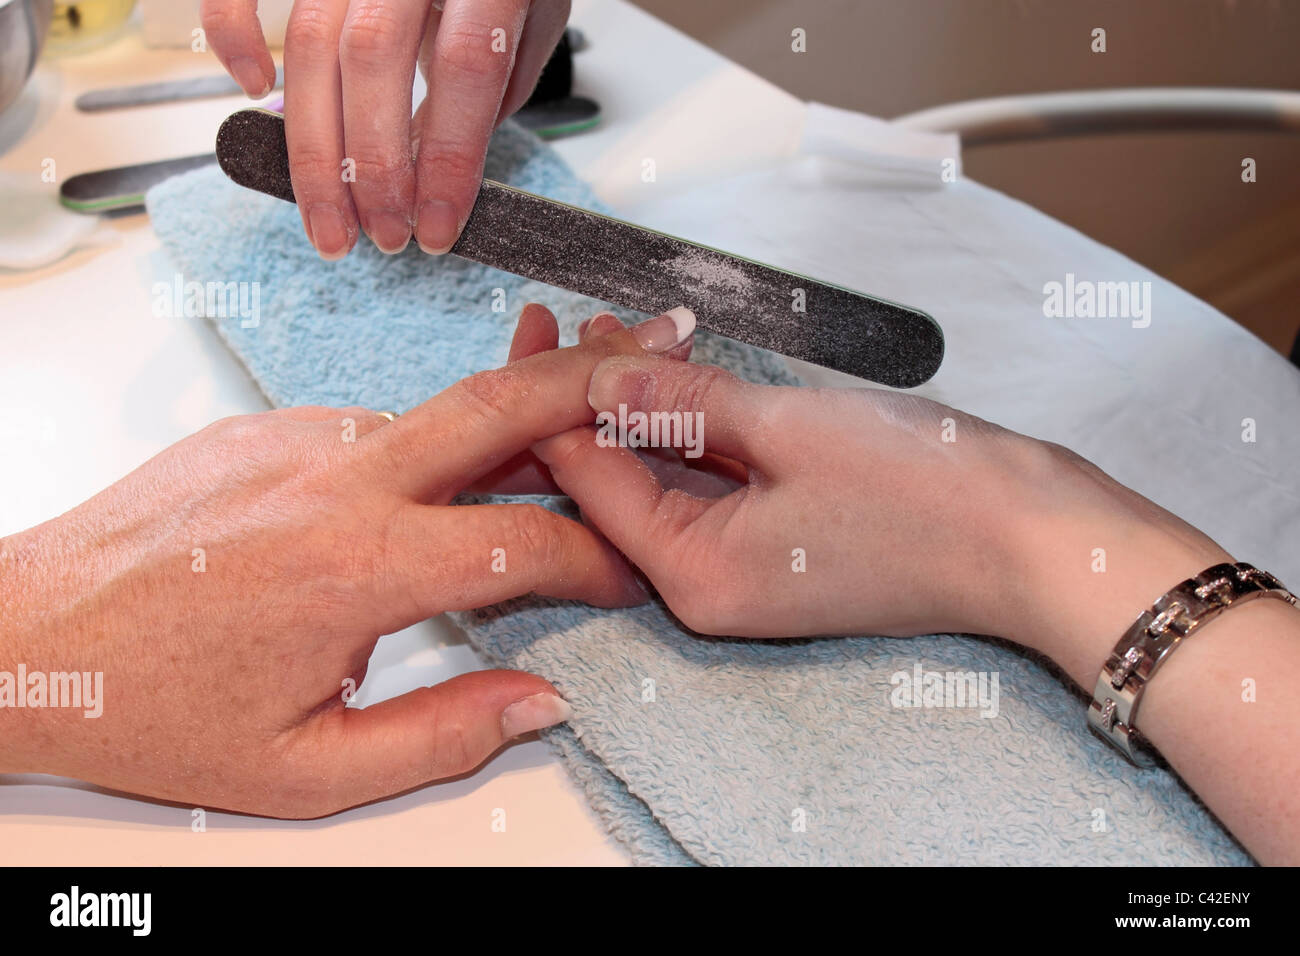 Lady receiving a manicure at a beauty salon. Stock Photo